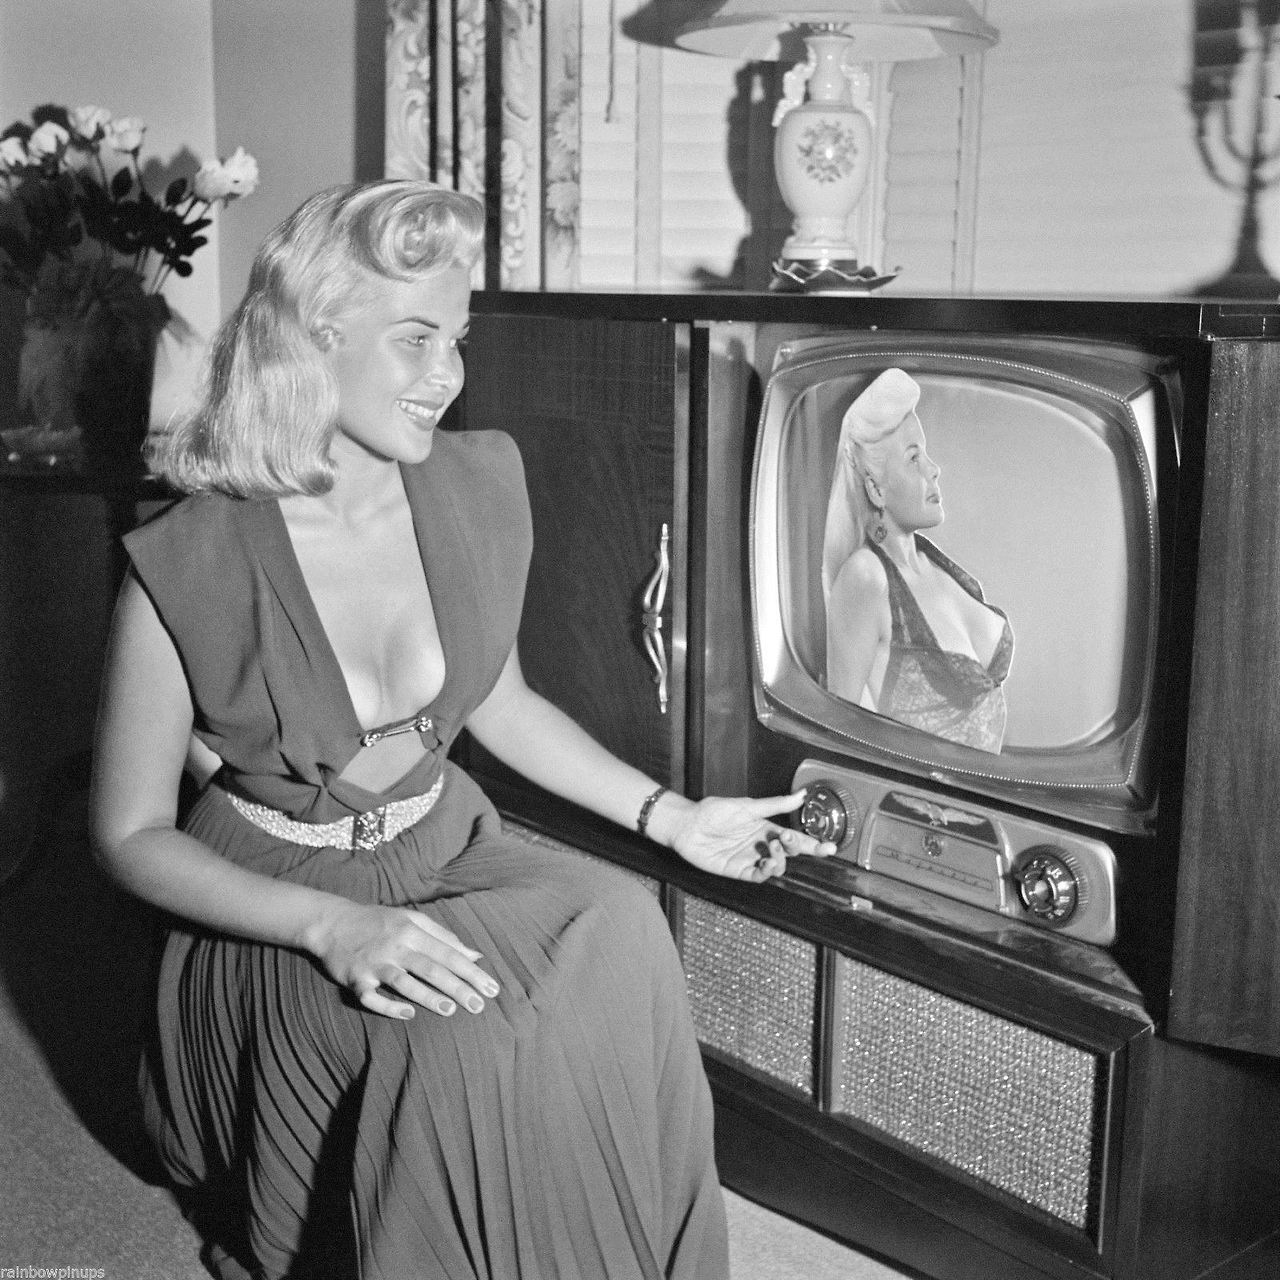 broadcastarchive-umd:  damsellover:  Gloria Pall  with a vintage console TV, 1950s.